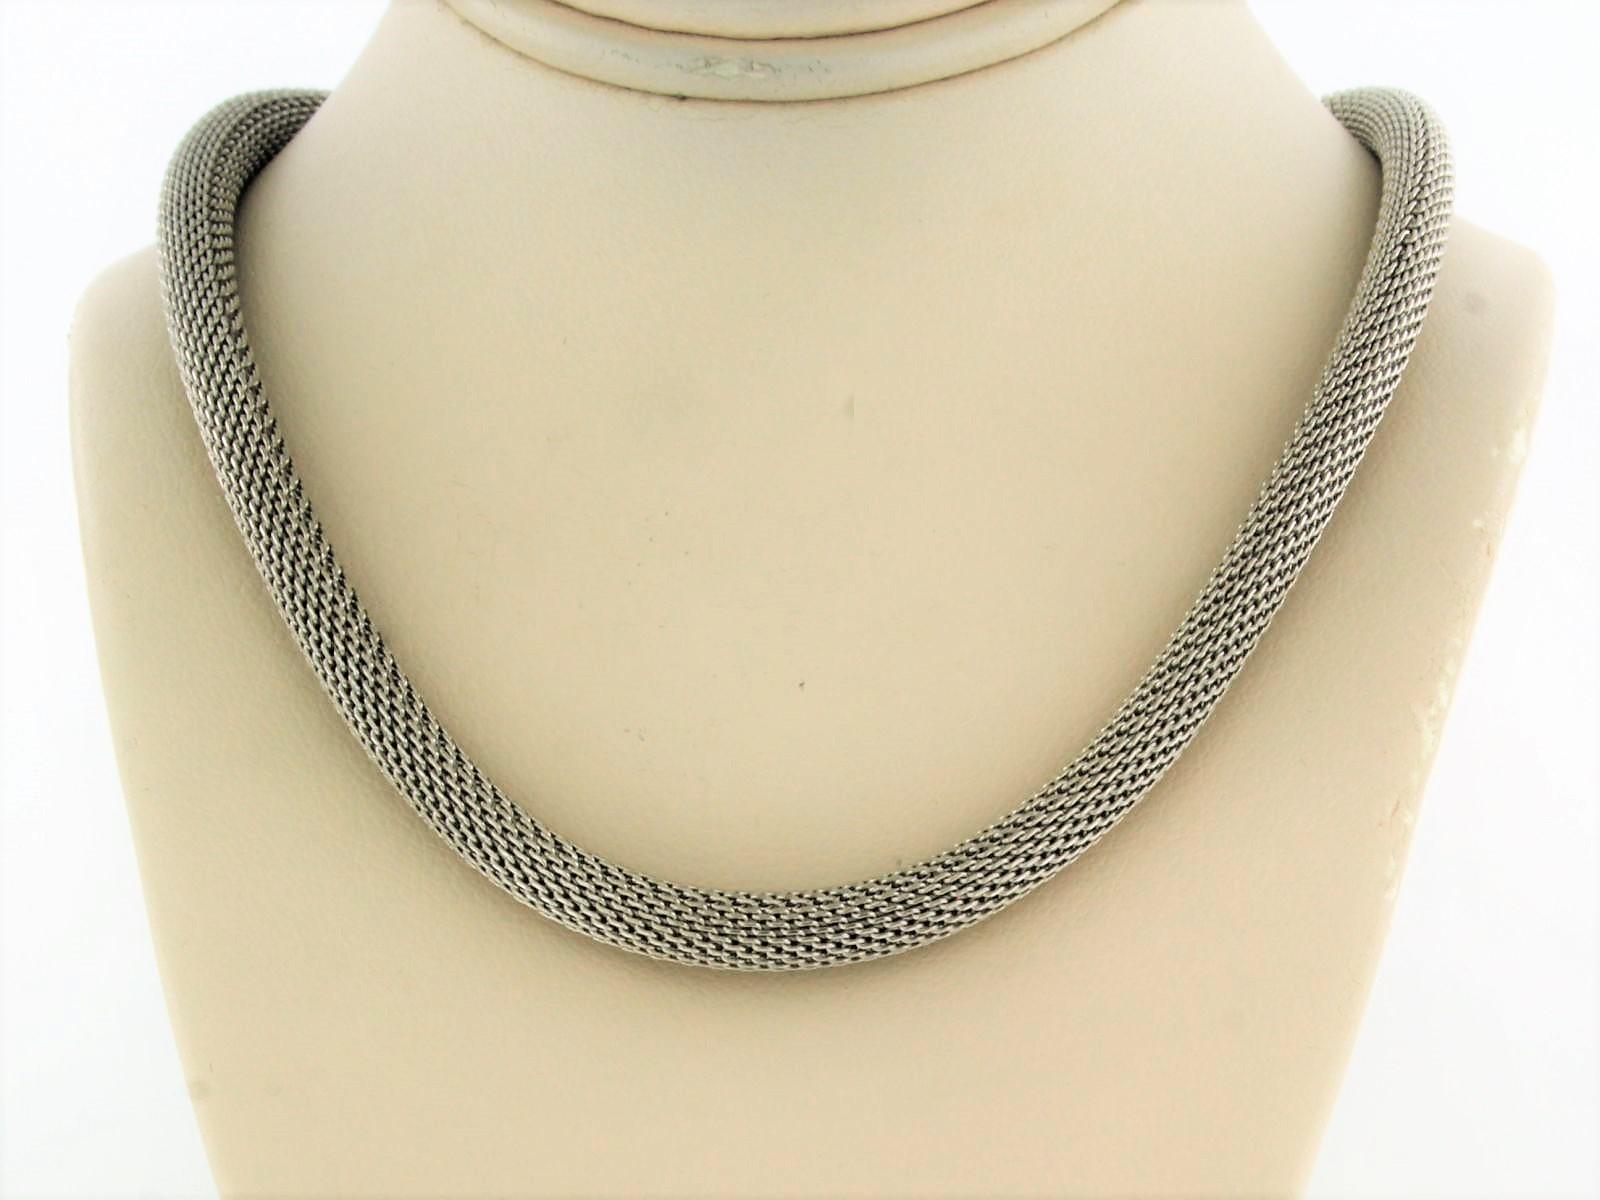 14 kt white gold necklace - 40 cm

detailed description:

the necklace with lock is 40 cm long and 5.0 mm wide

weight 27.5 grams

hallmark present, tested and guaranteed 14k gold

necklace is in good condition
20221443